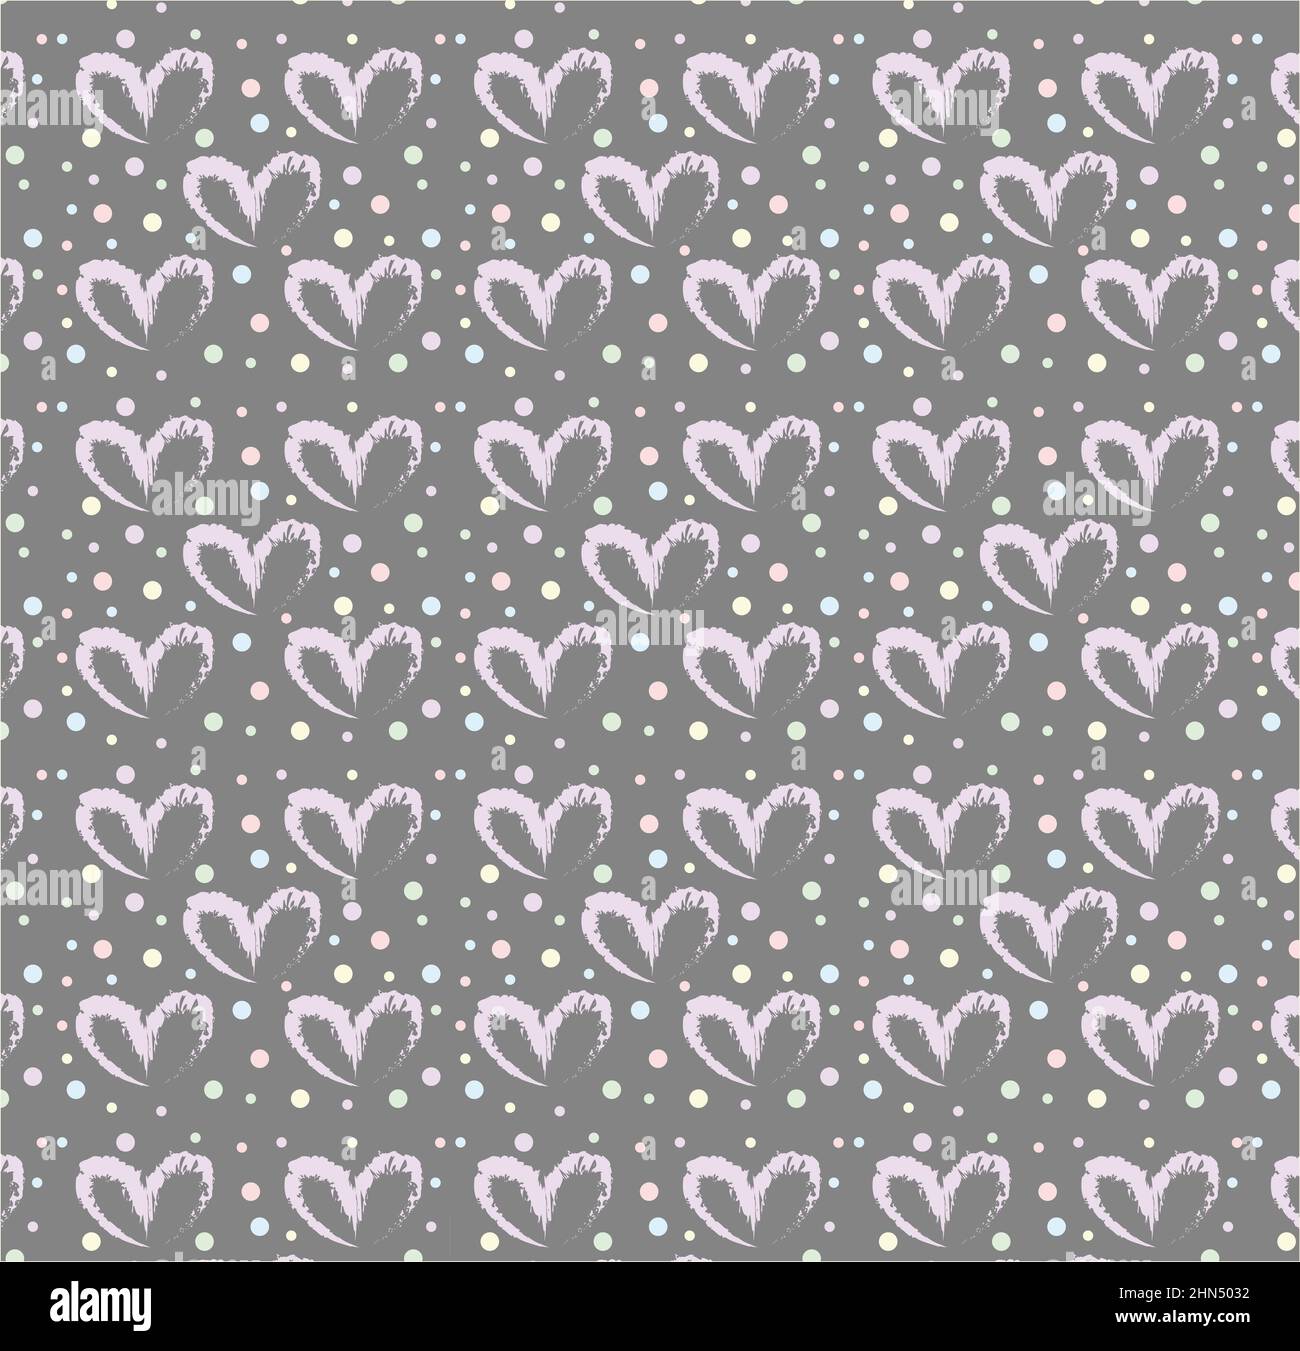 Seamless pattern of hand drawn simple hearts in purple on gray background with colored dots in pastel rainbow colors Stock Photo